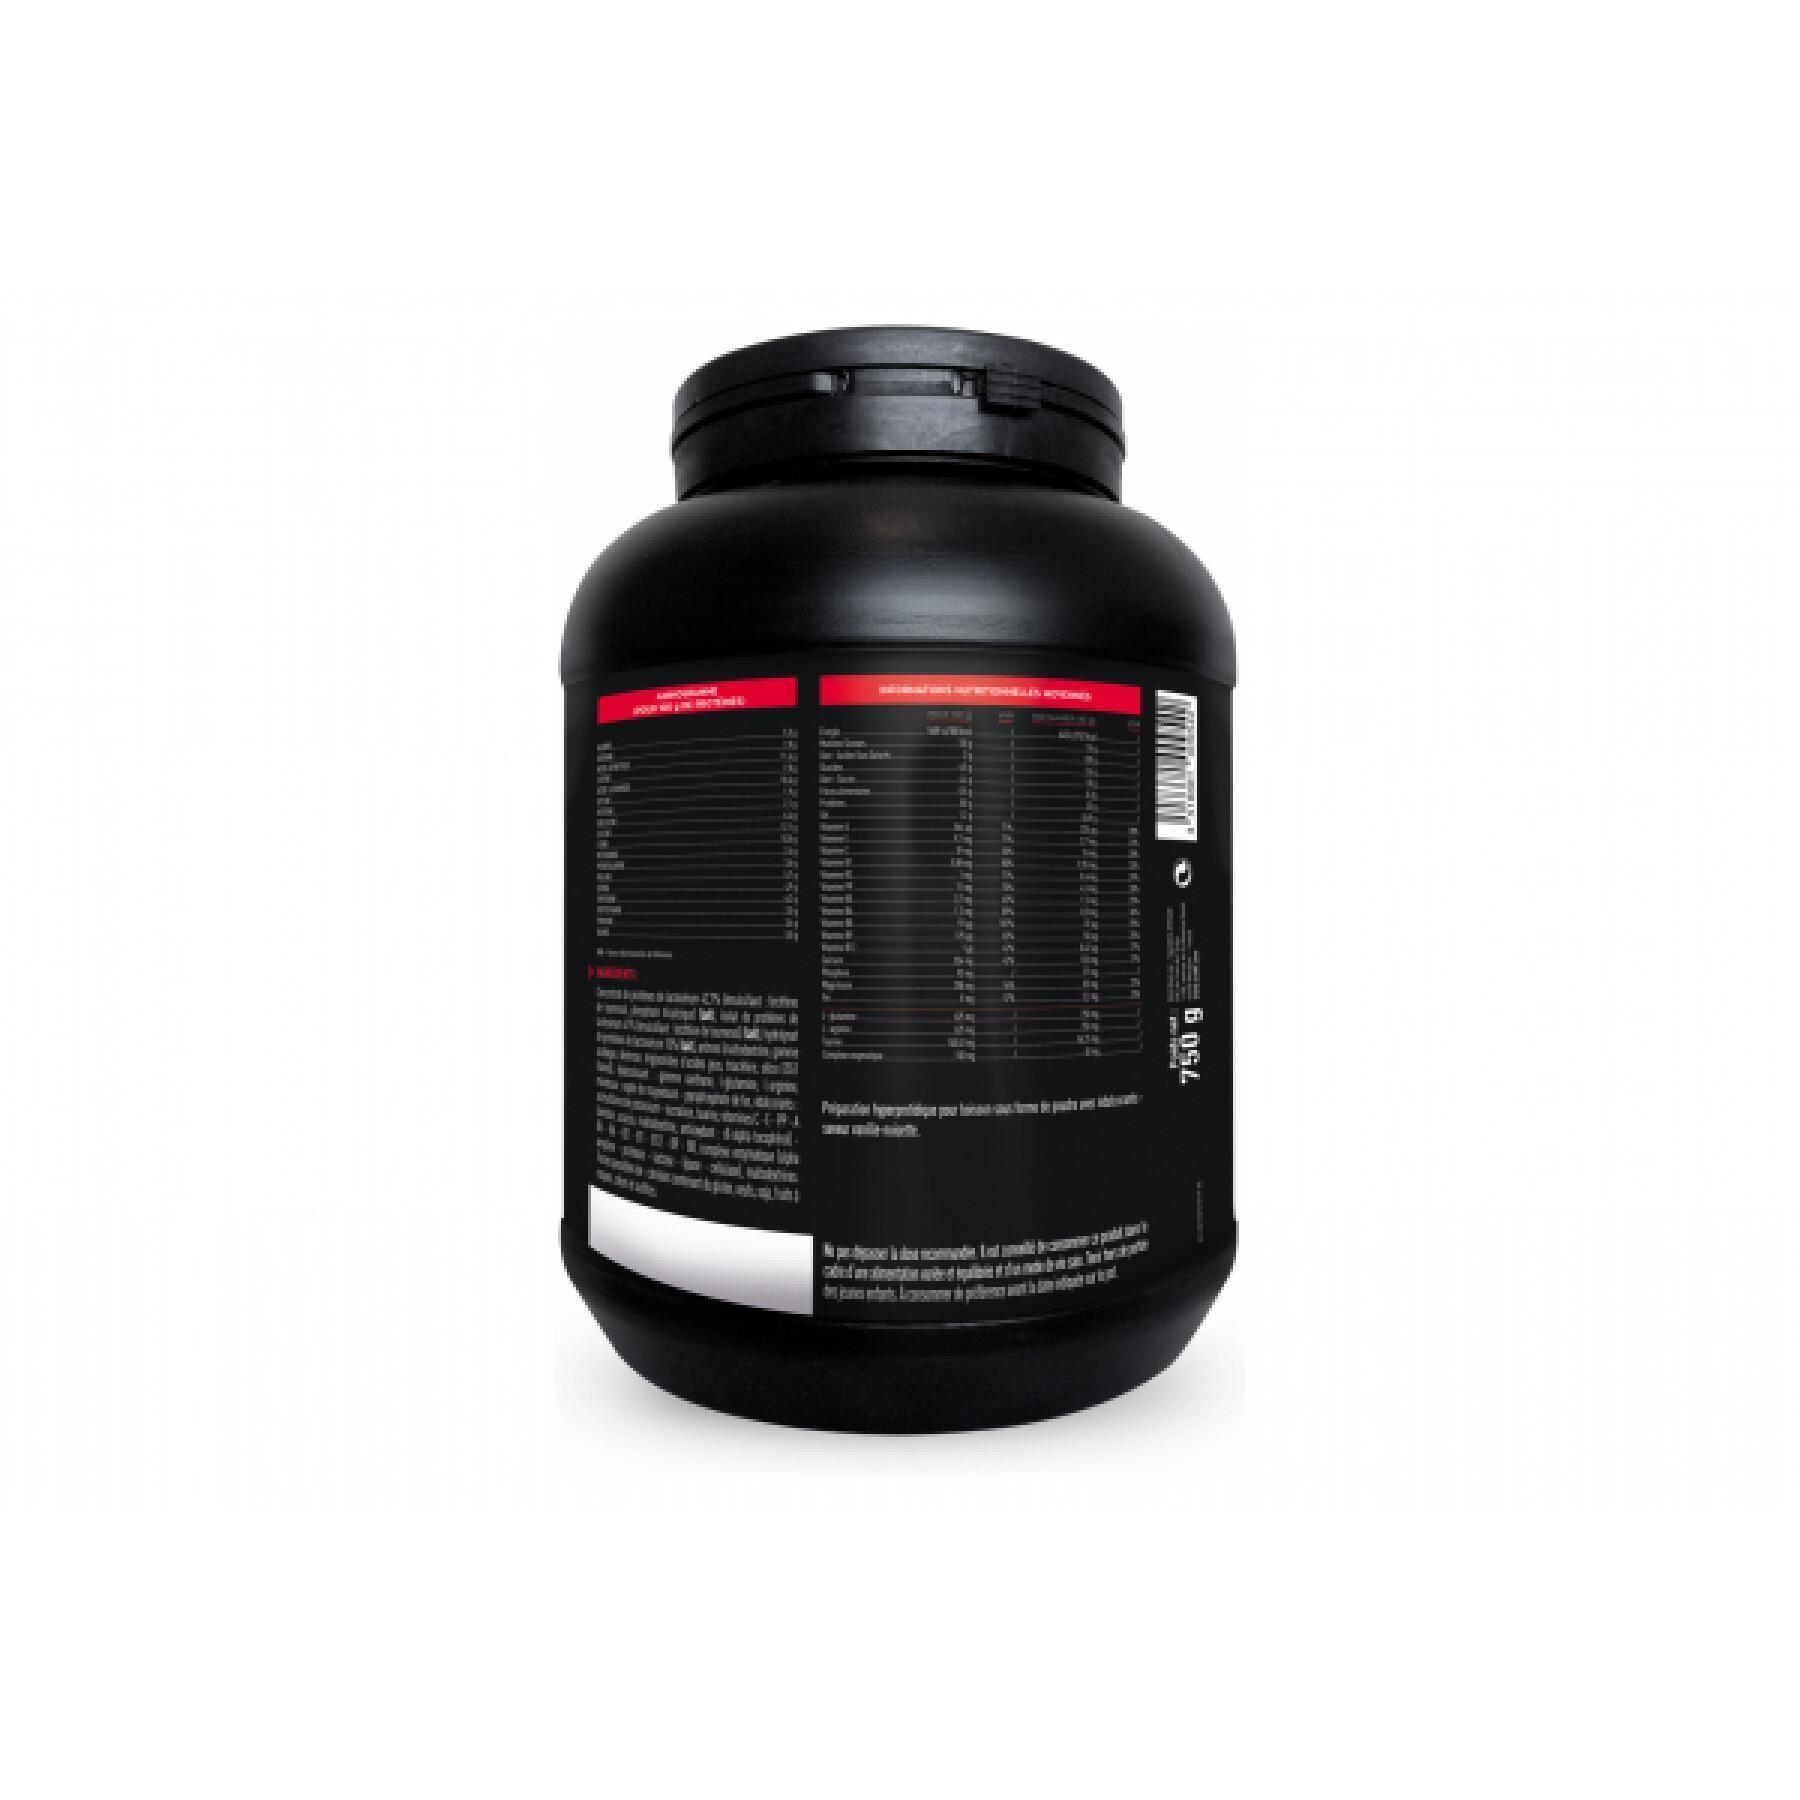 Pure Whey Vanille Hazelnoot EA Fit